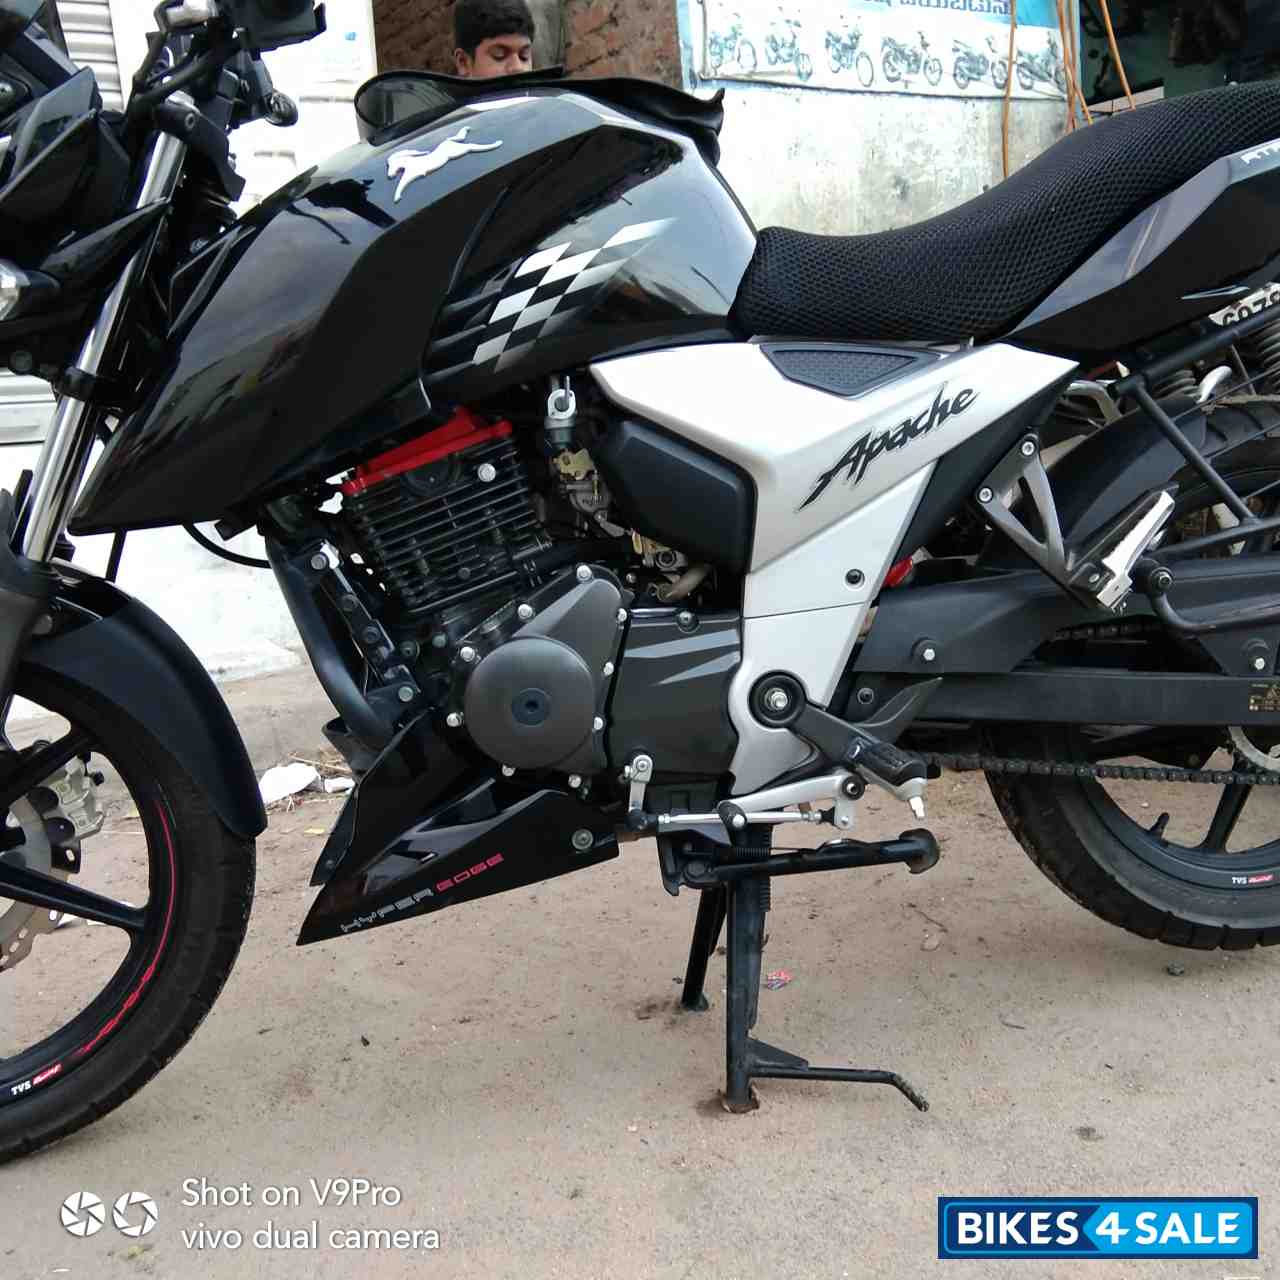 Used 2018 Model Tvs Apache Rtr 160 4v For Sale In Anantapur Id